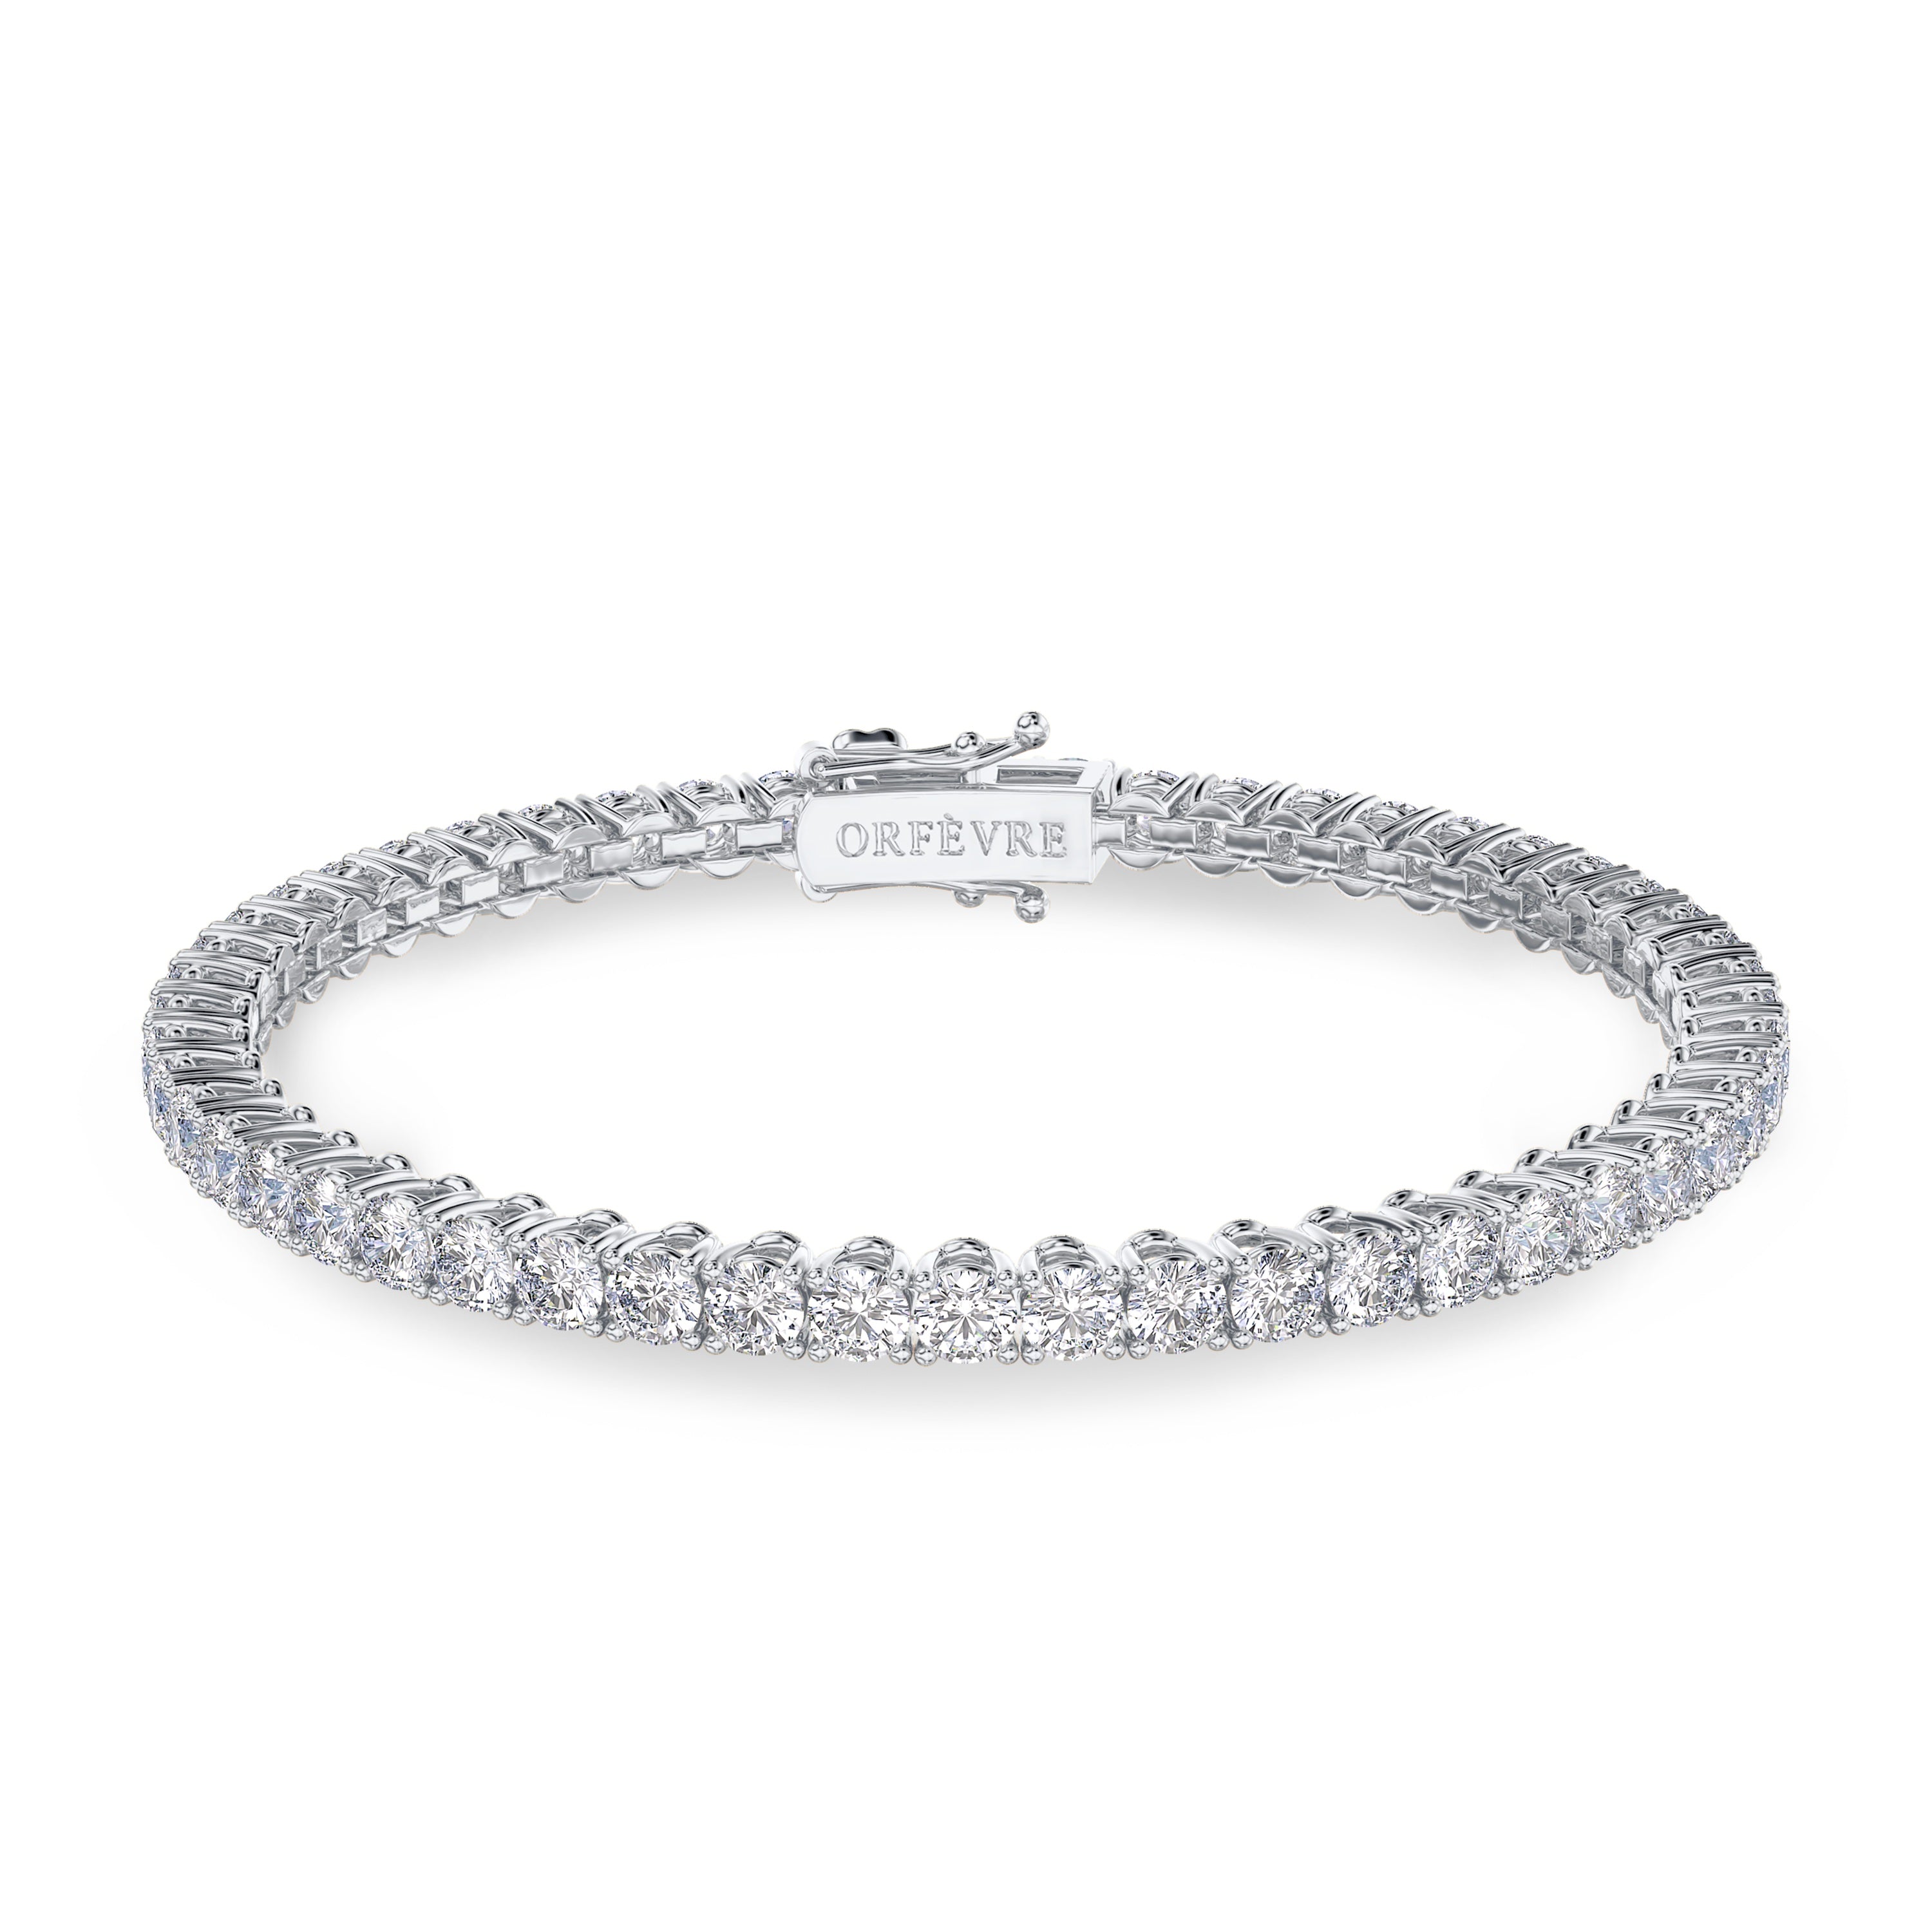 6.91 carat tennis bracelet in 18 white gold, FG color and SI clarity